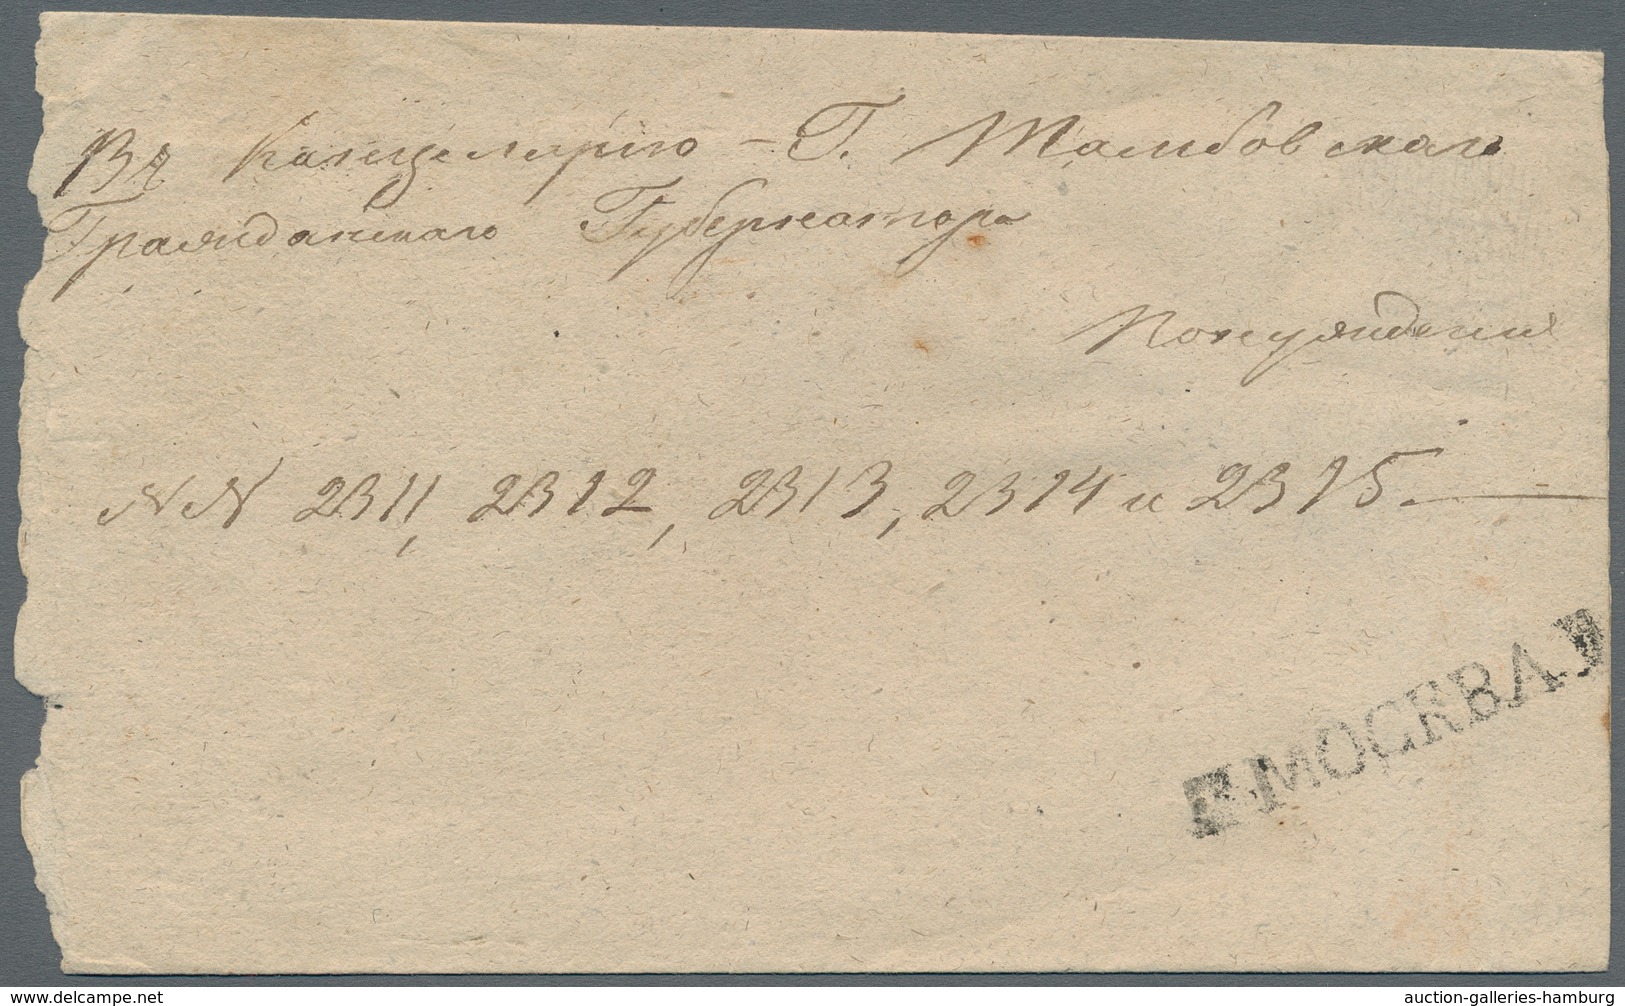 Russland - Vorphilatelie: 1826/46 four covers all sent from Moscow to Tambov, different types of bla